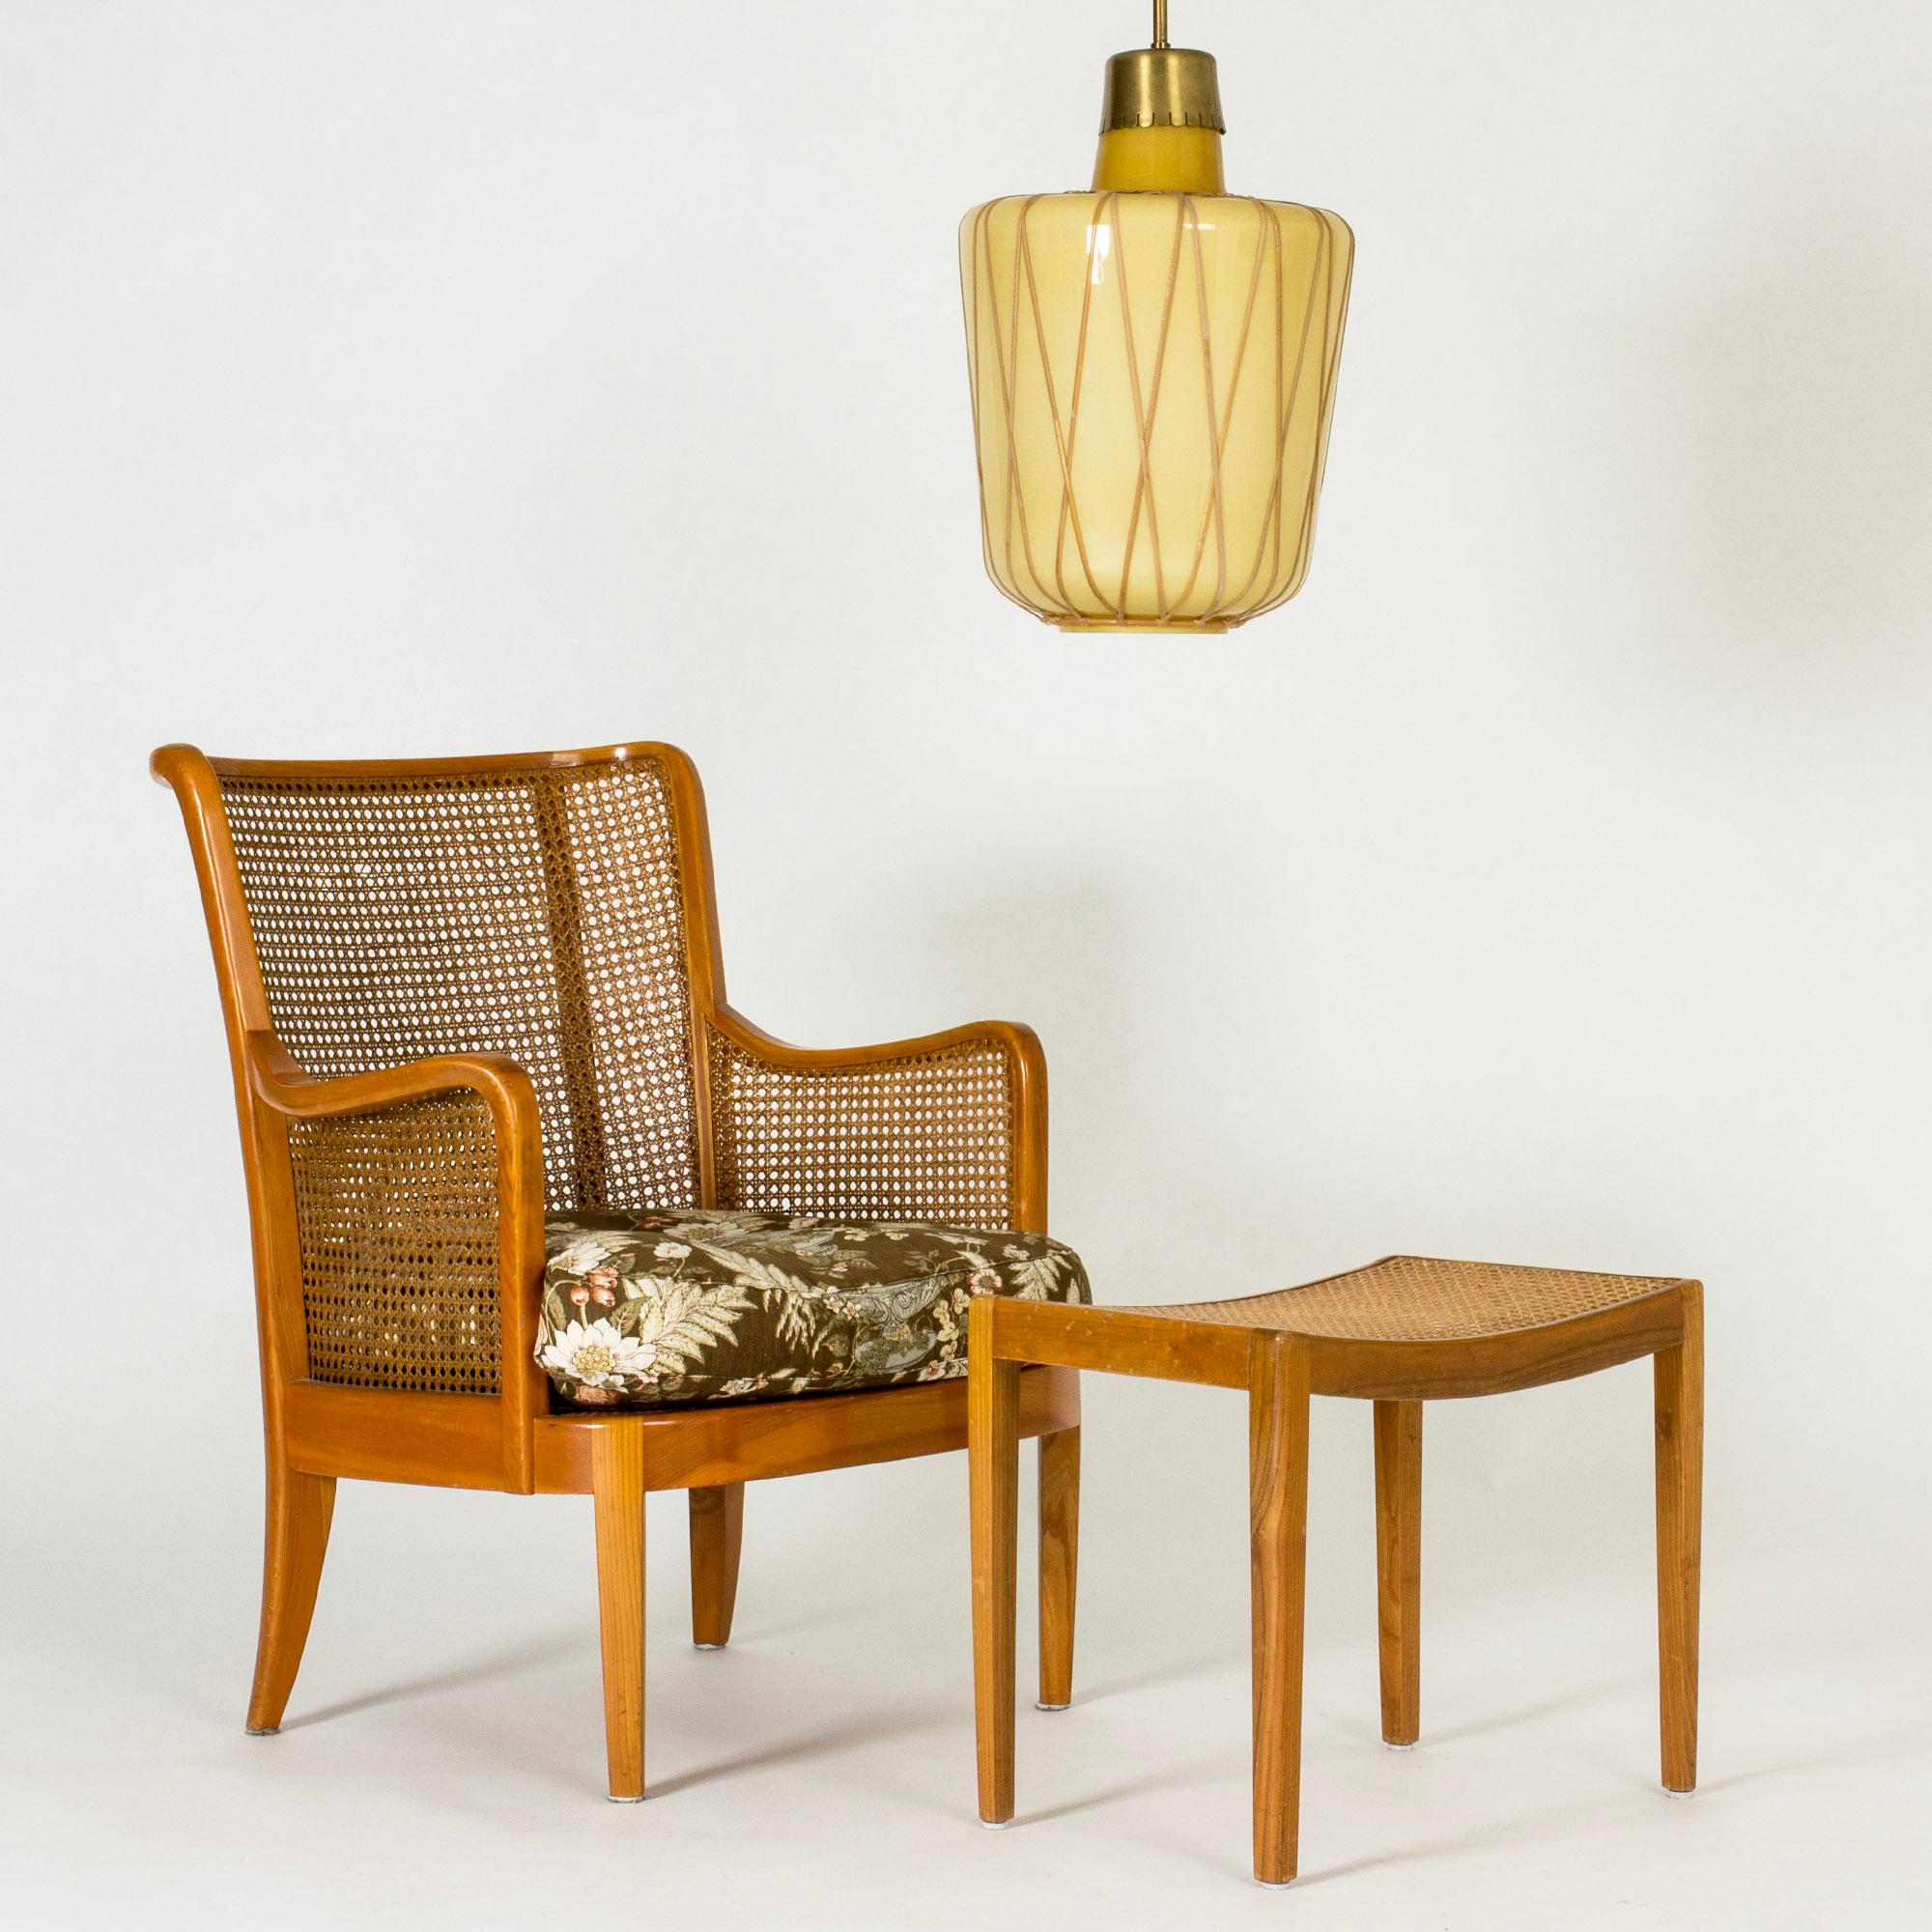 Striking Swedish Modern ceiling light by Bo Notini, with a large yellow tinted glass shade decorated with rattan strands in a graphic pattern. Brass stem and ceiling cup.